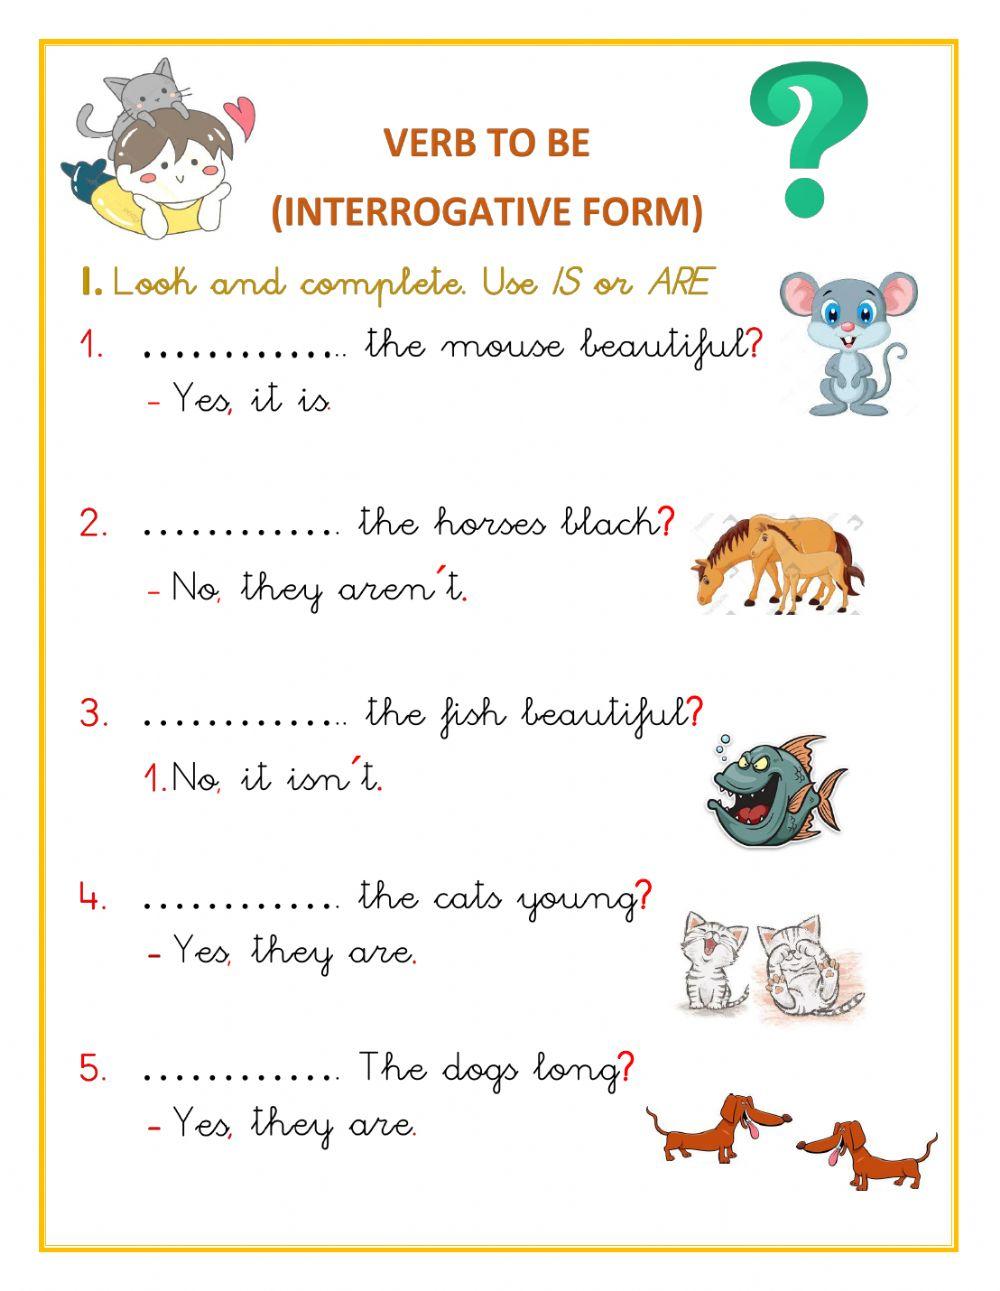 VERB TO BE (interrogative form)